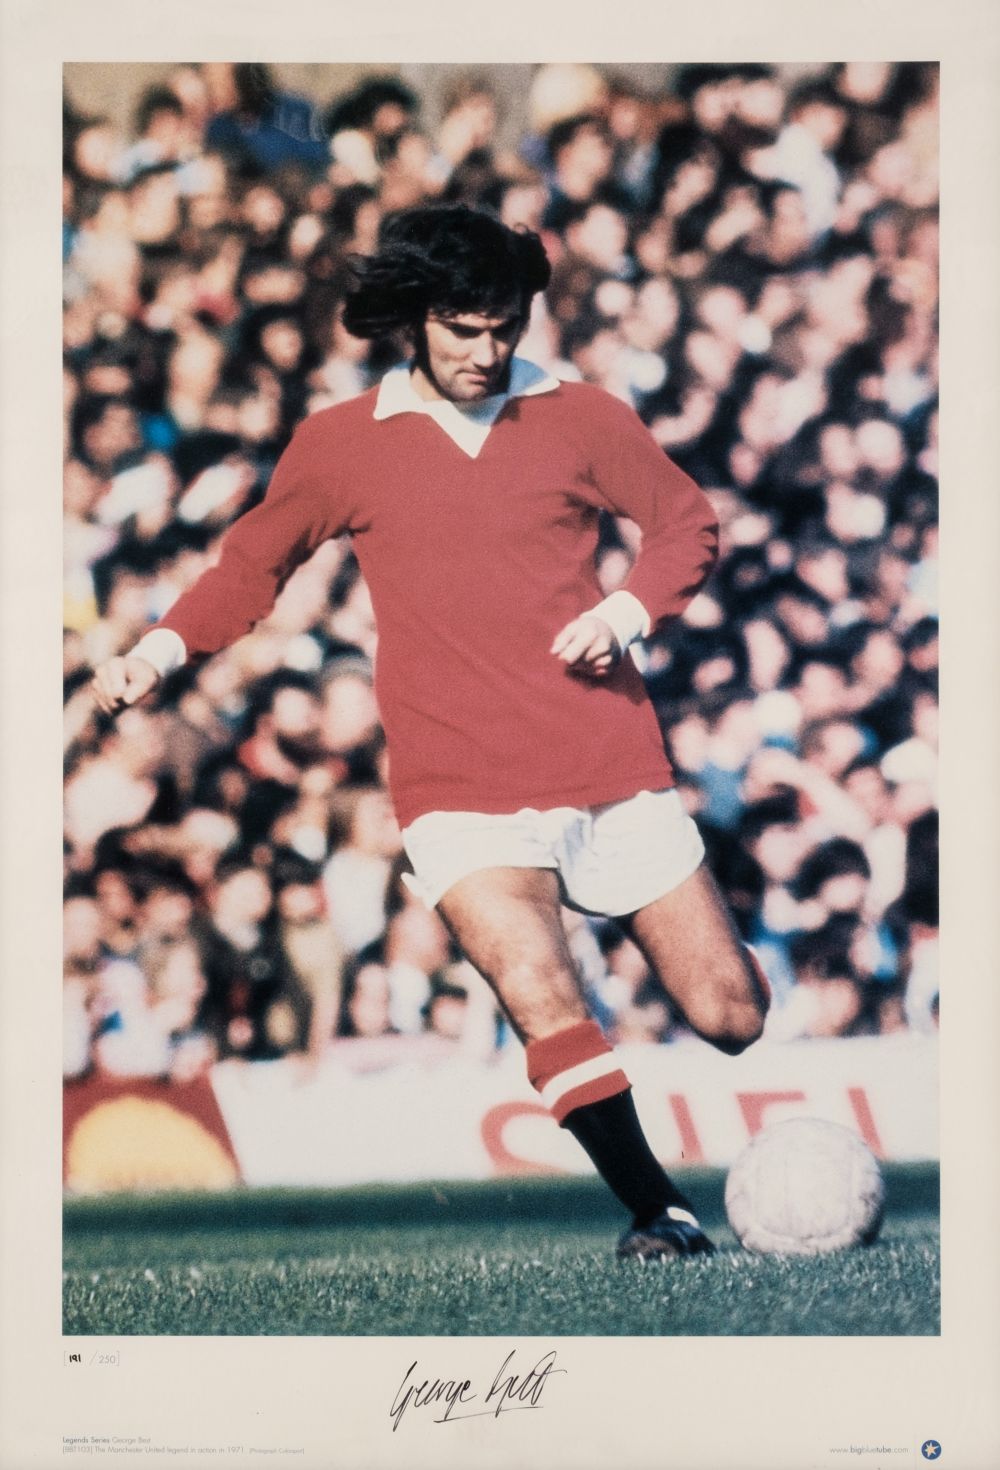 Football. A limited edition photographic print, signed by George Best